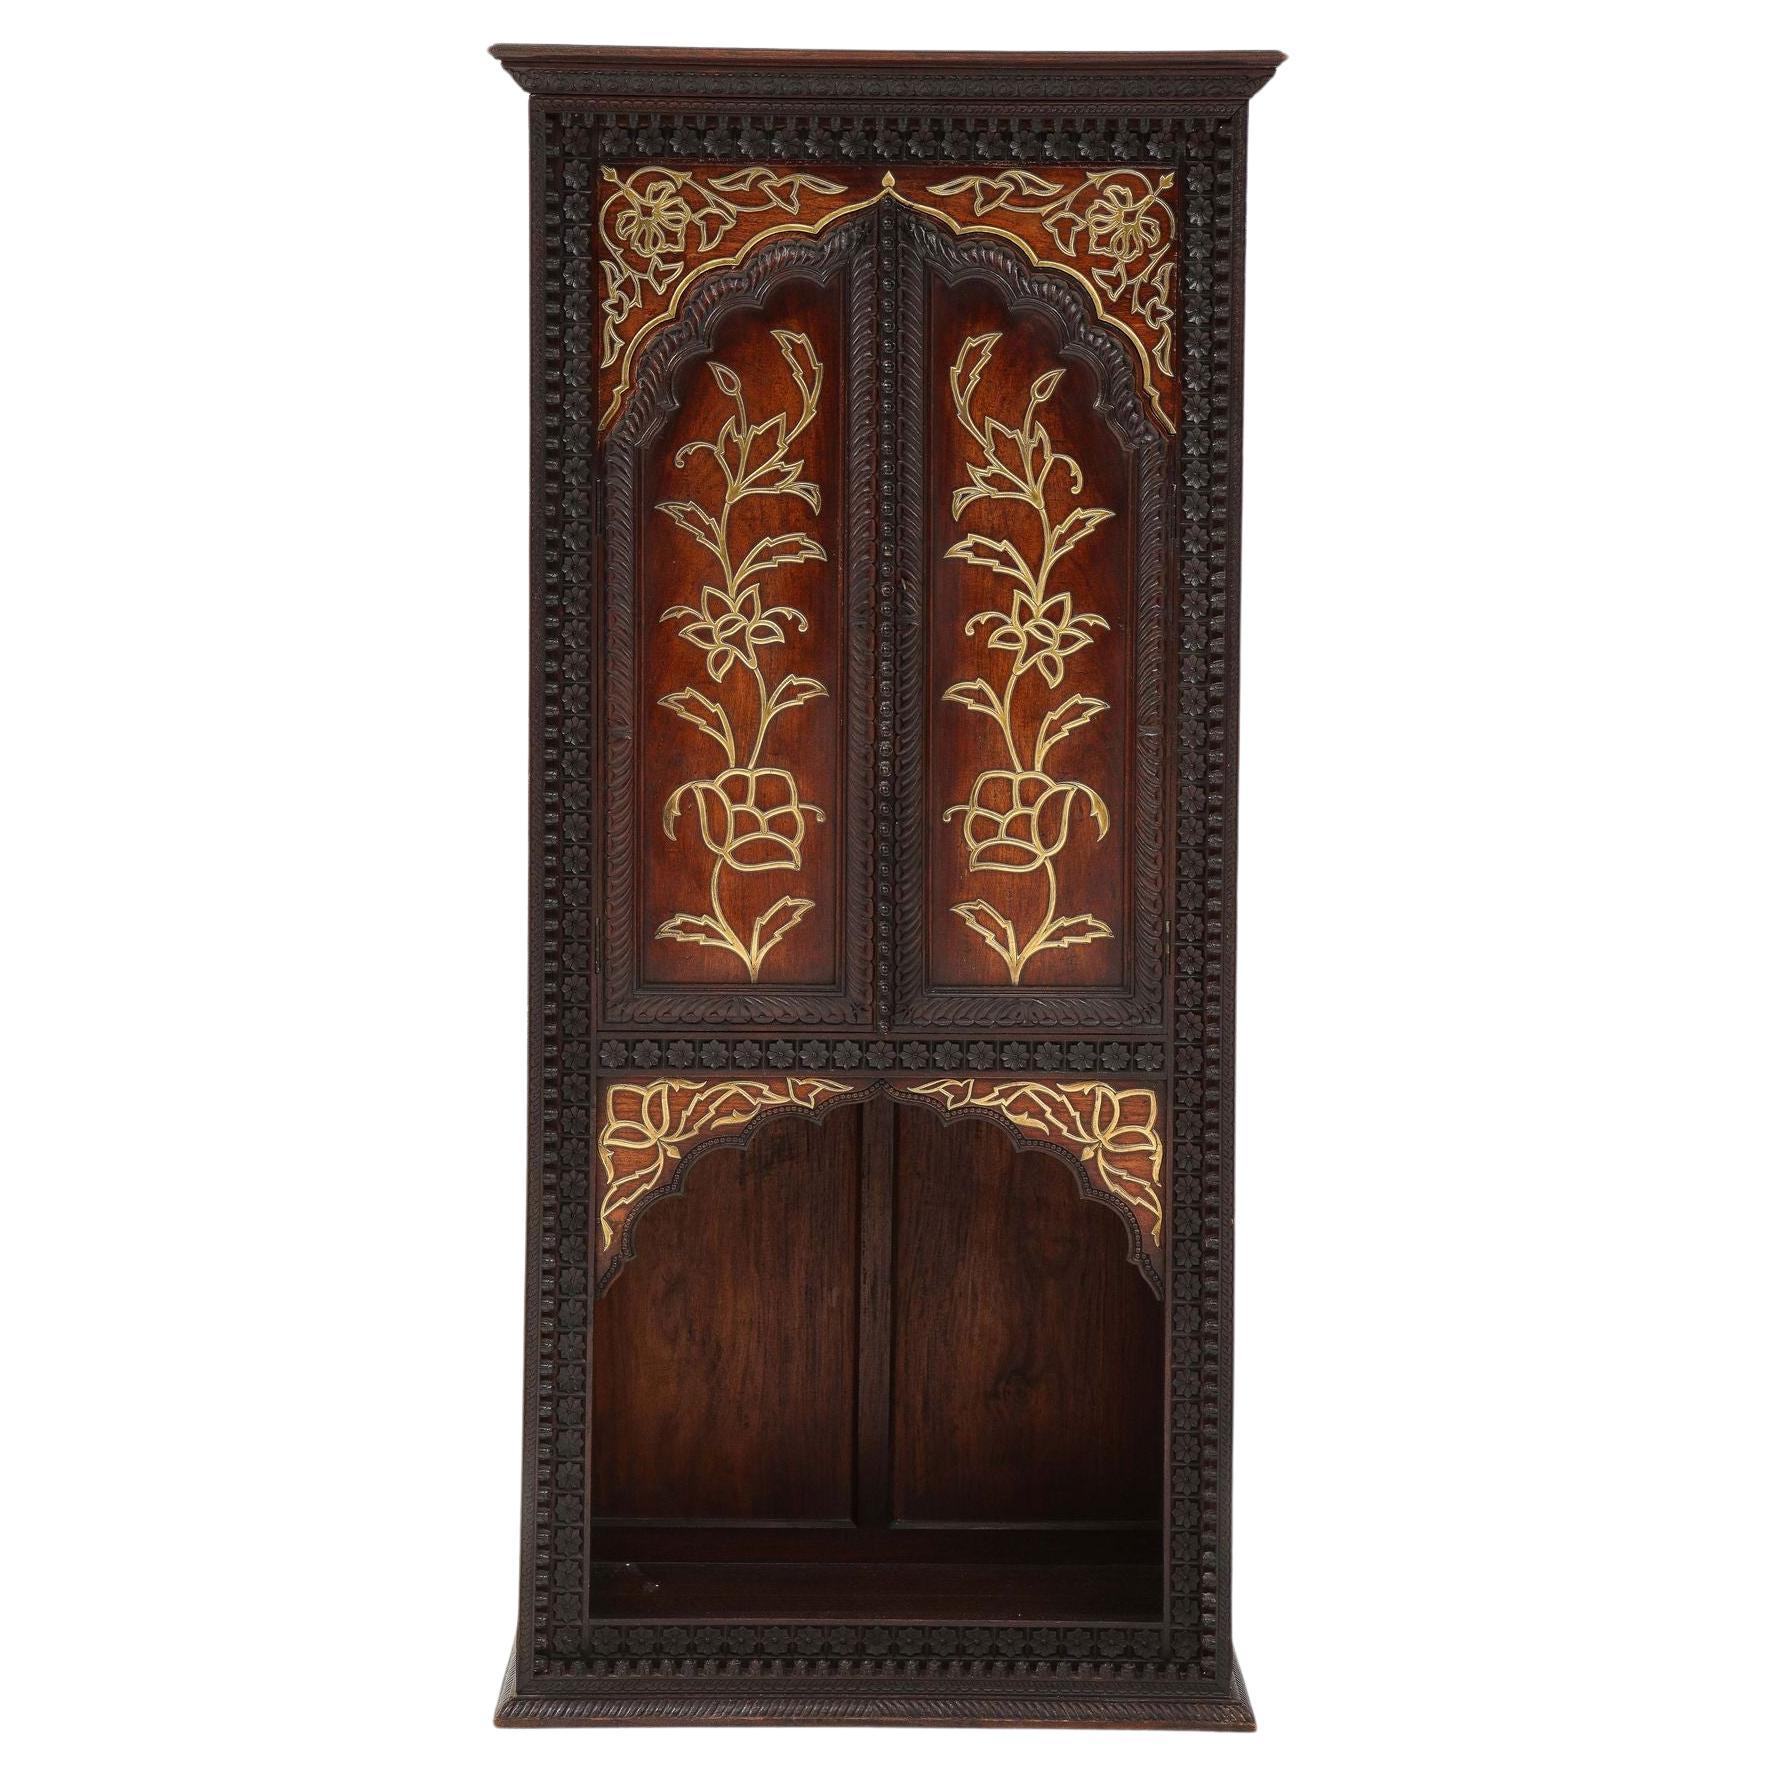 Very fine late 19th Century Indian cabinet, in richly carved exotic hardwood with brass molded decoration in the Aesthetic taste, the two arched doors over open lower section, having unique brass trim in foliate pattern, the case painstakingly